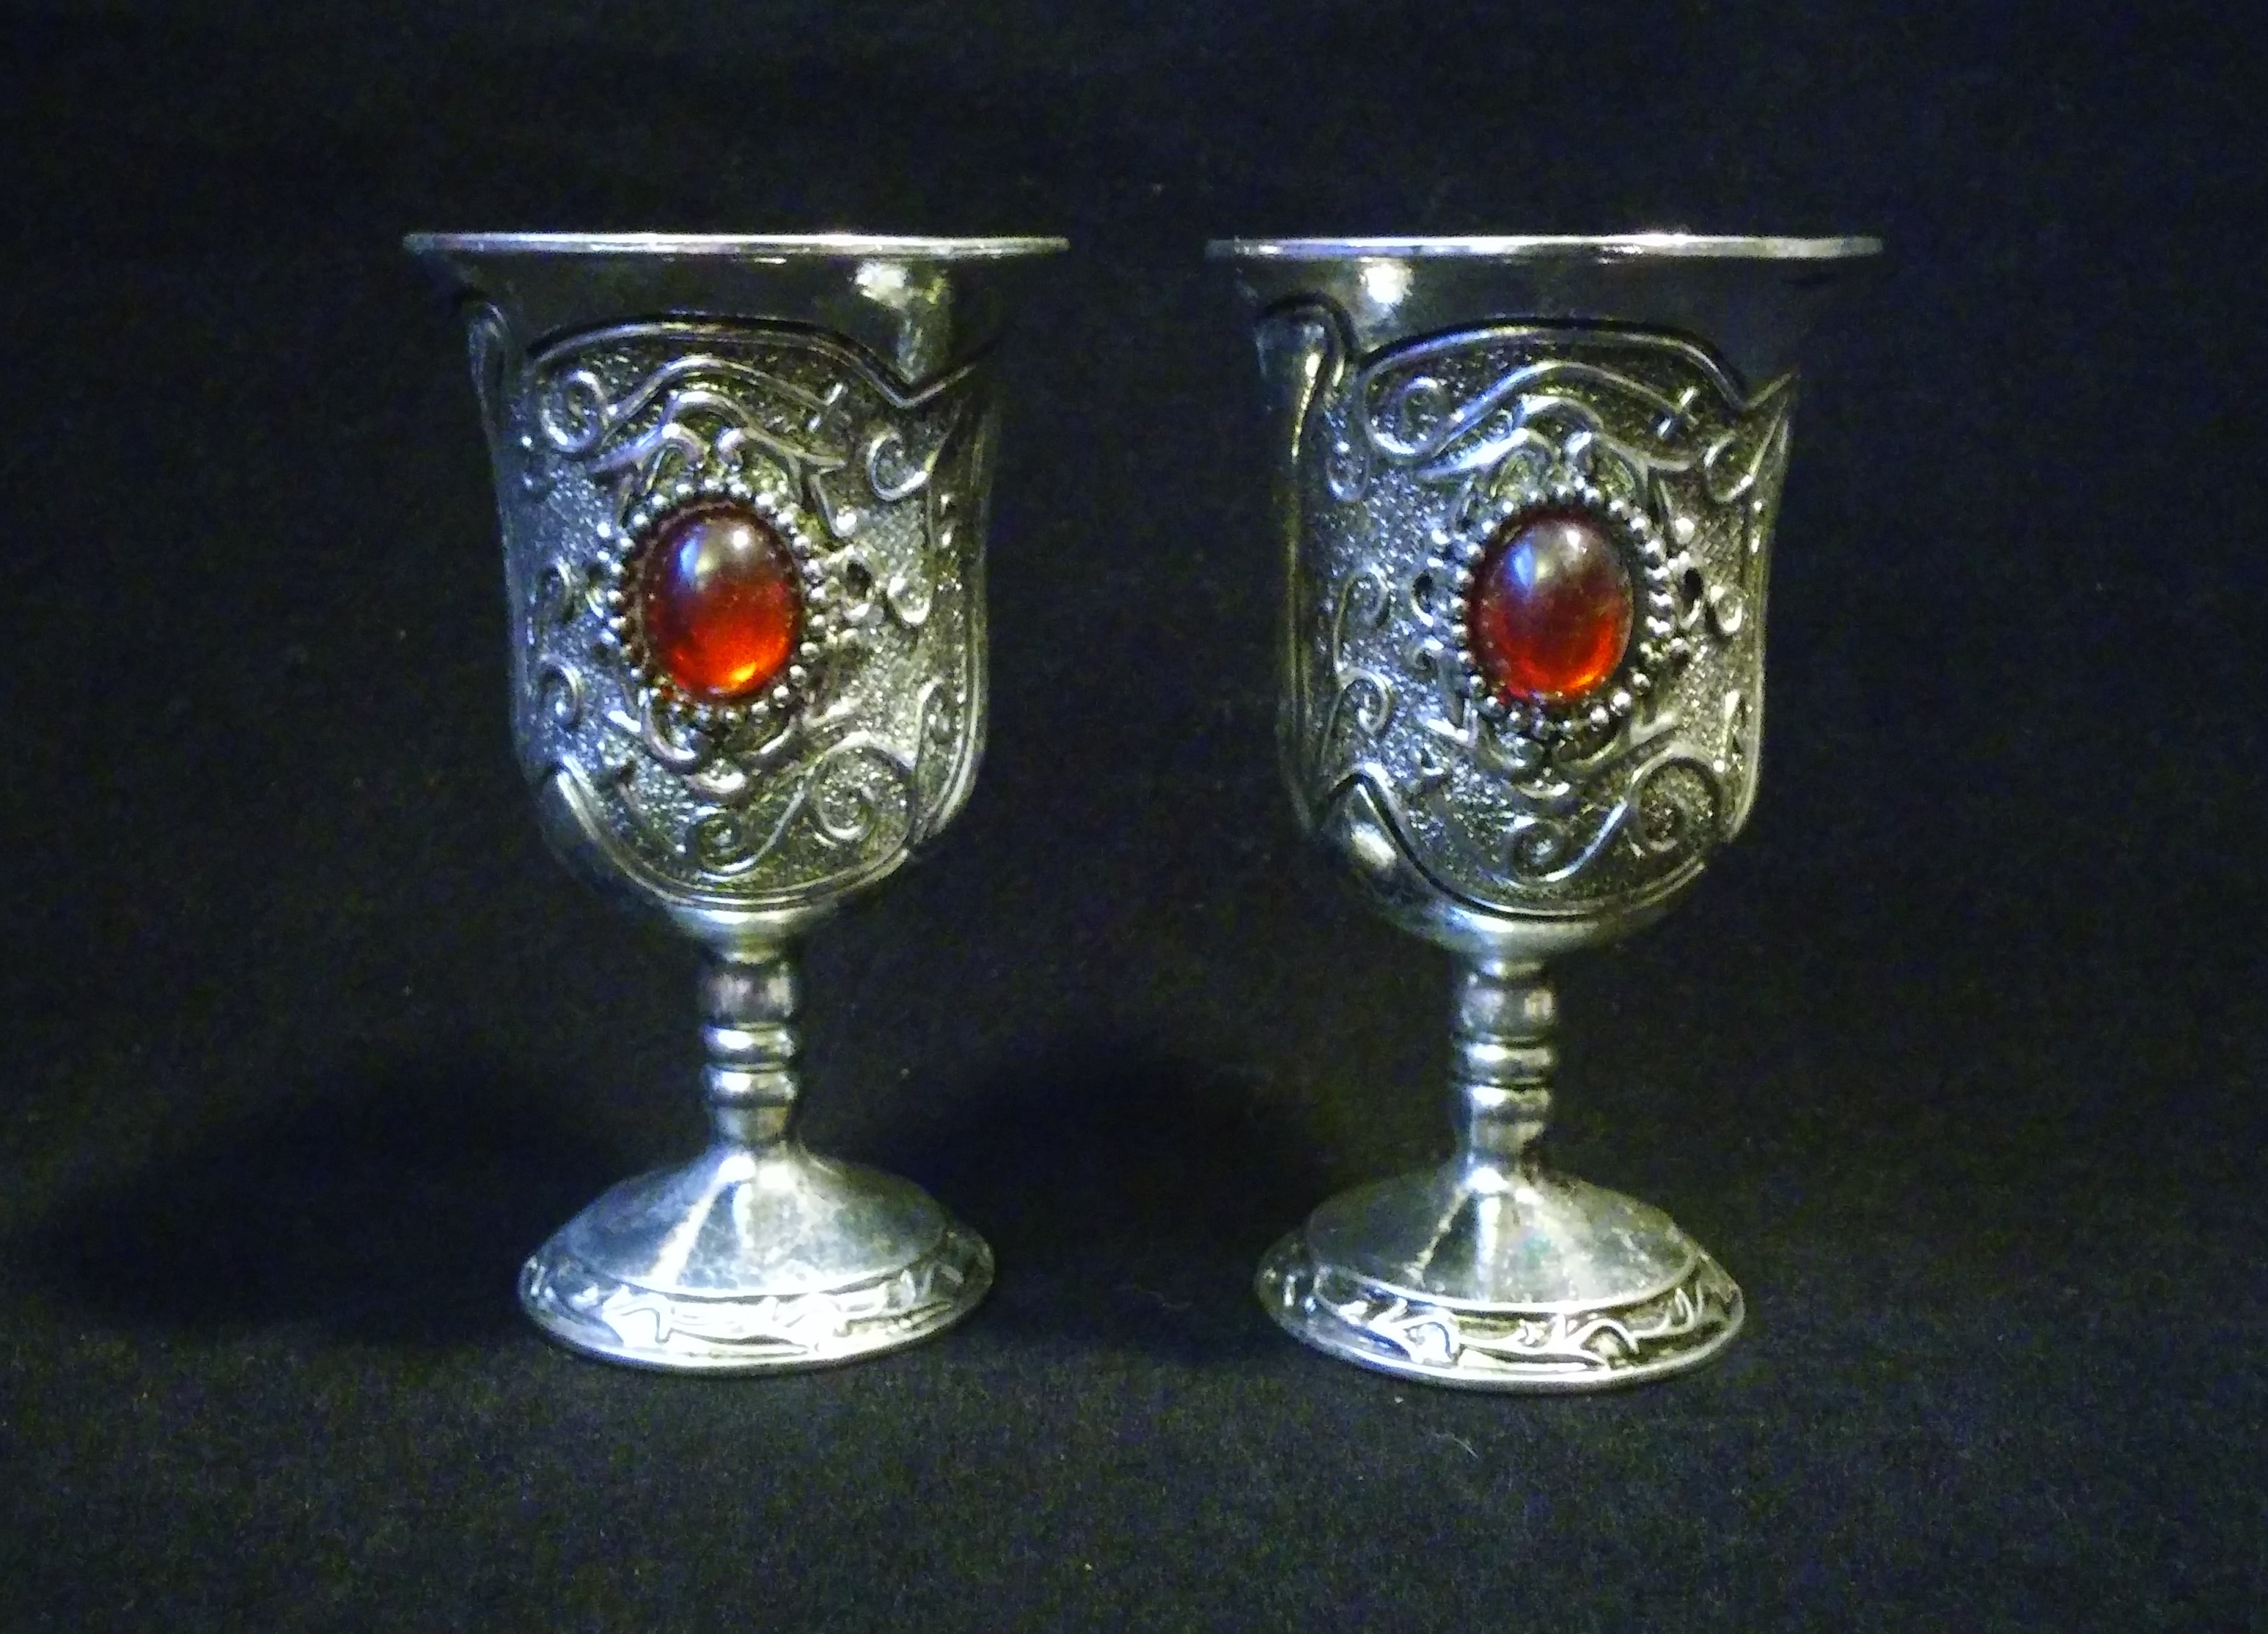 Miniature Silver and Red Goblet - LVSAGE